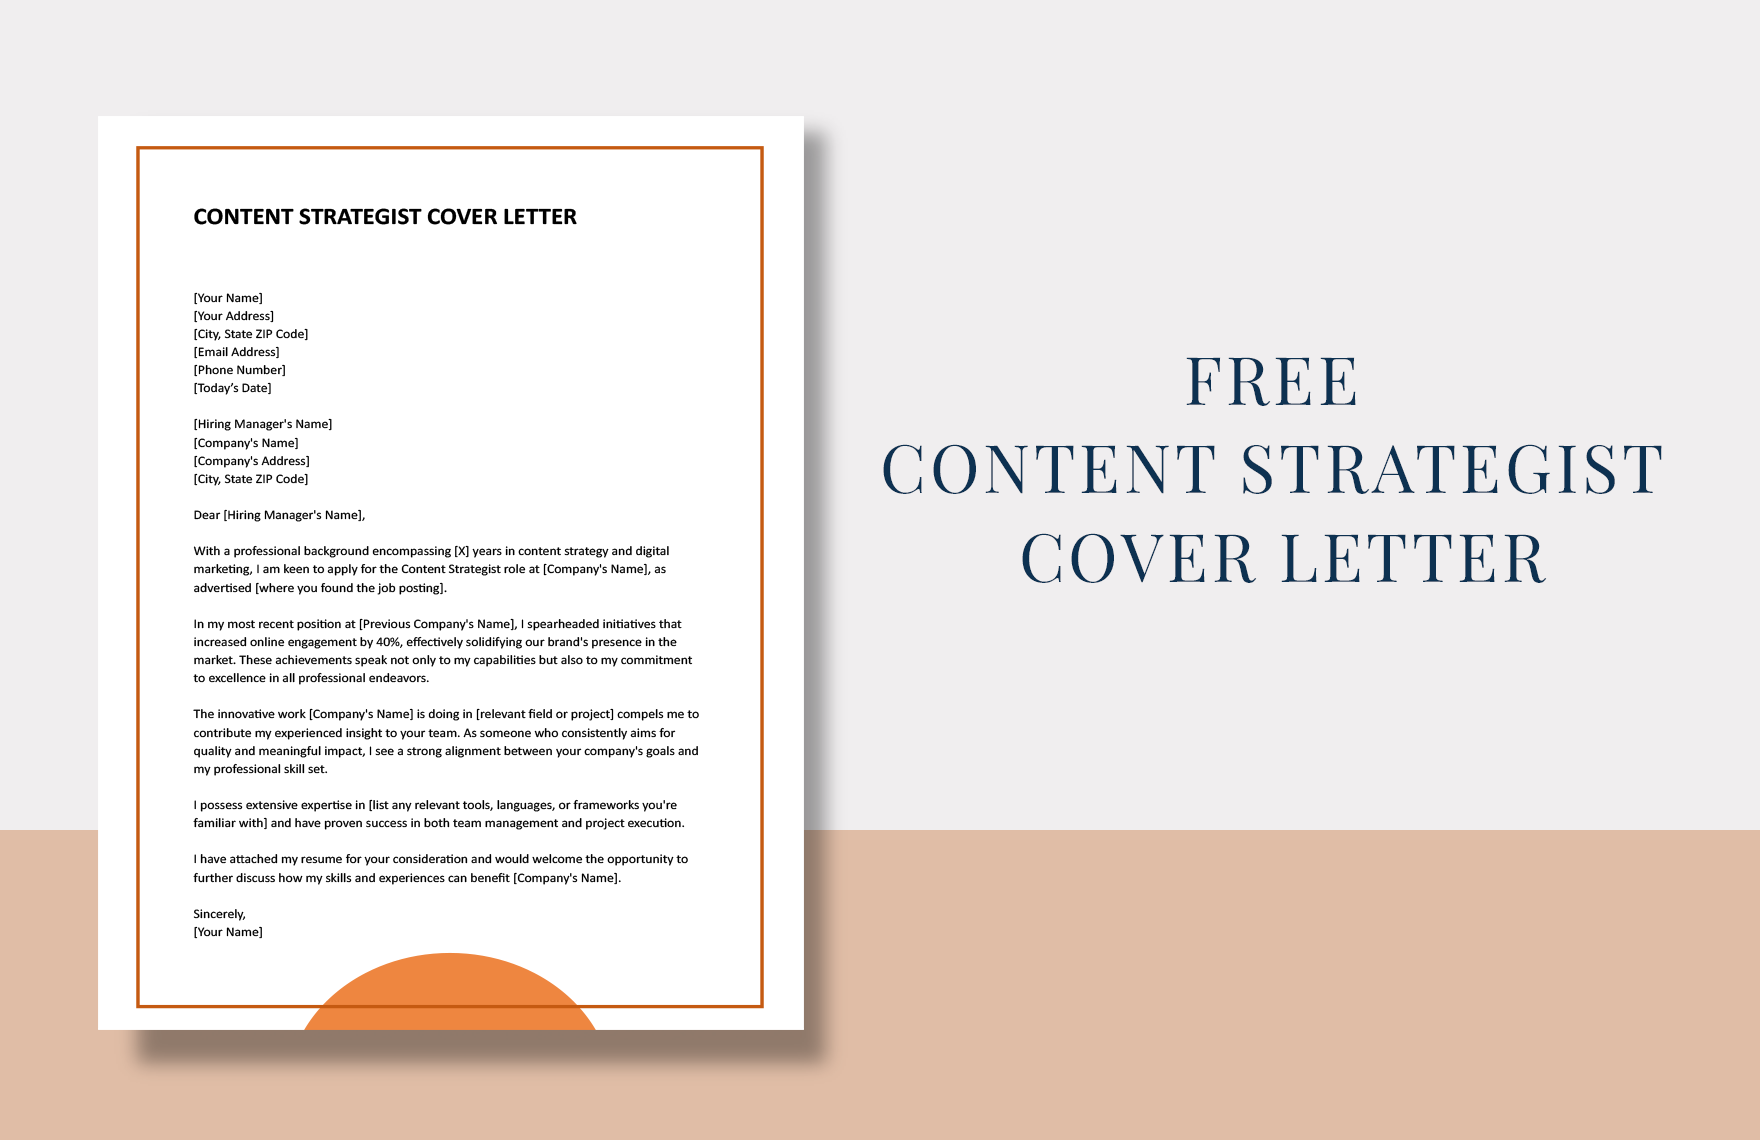 Content Strategist Cover Letter in Word, Google Docs